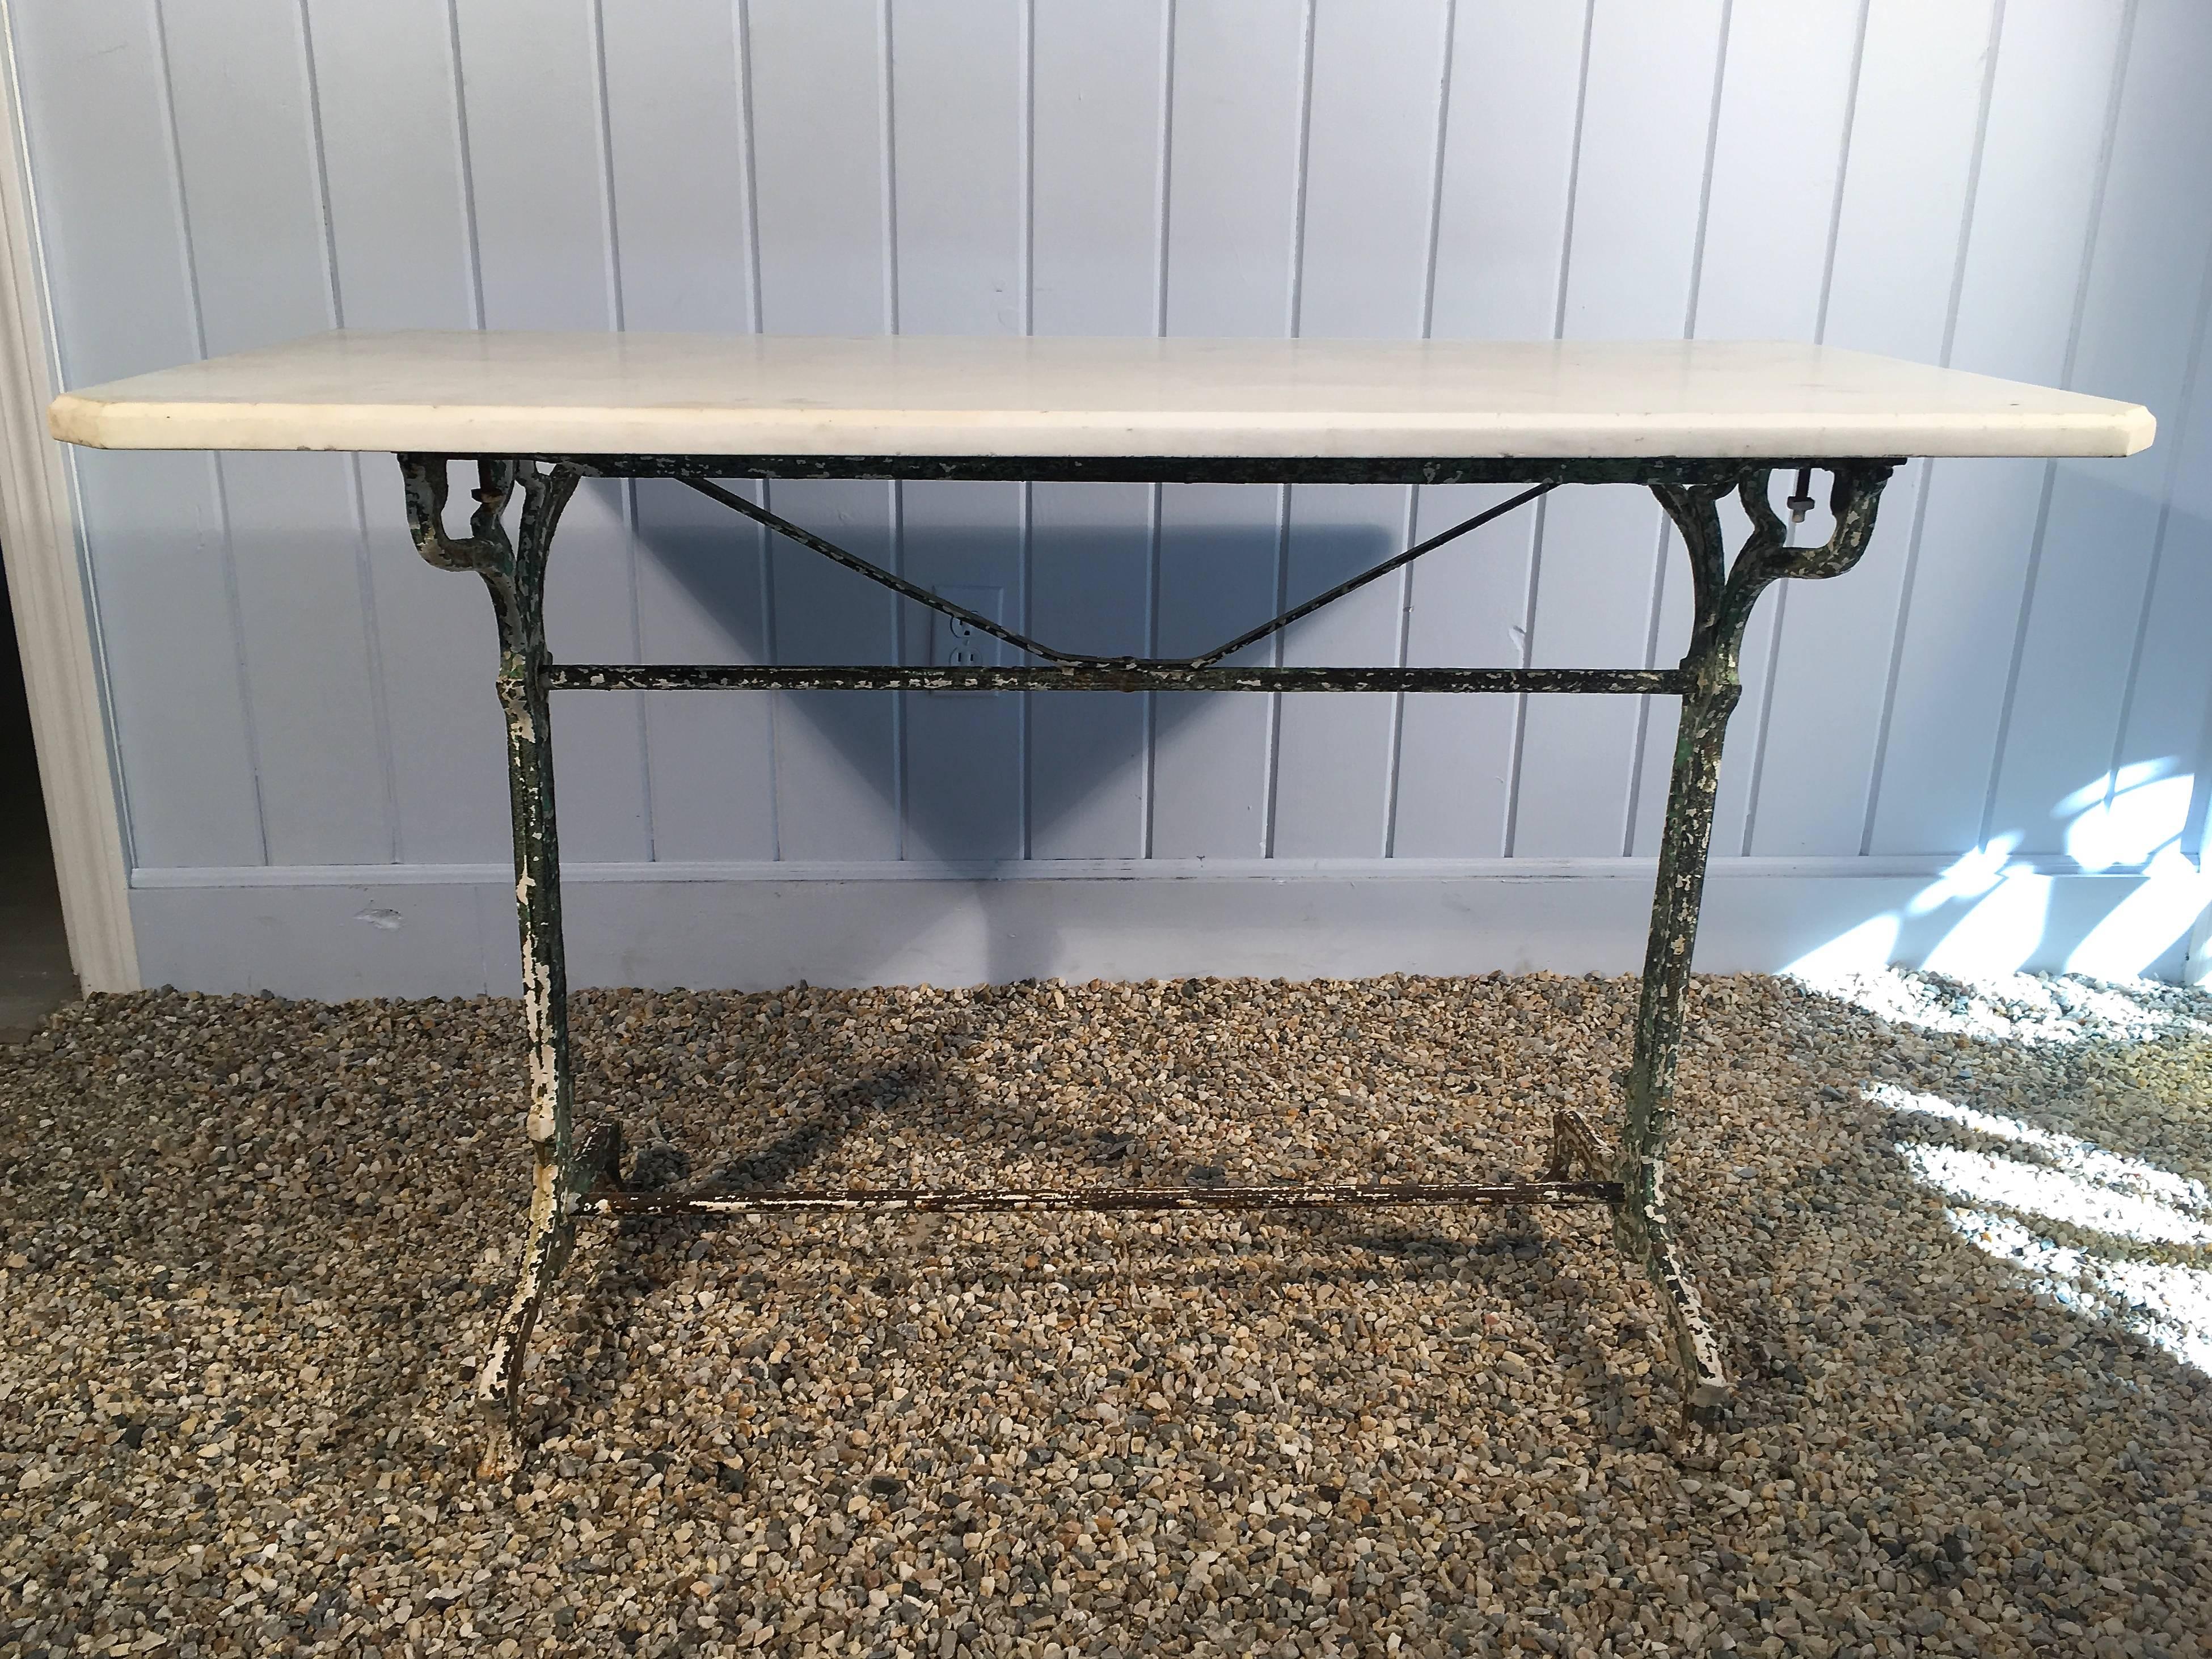 This fabulous cast iron Art Nouveau table base has a marvelous polychromed painted surface in green and white.  and features an antique white marble top, with beveled edge on three sides and cut corners. In very good antique condition overall